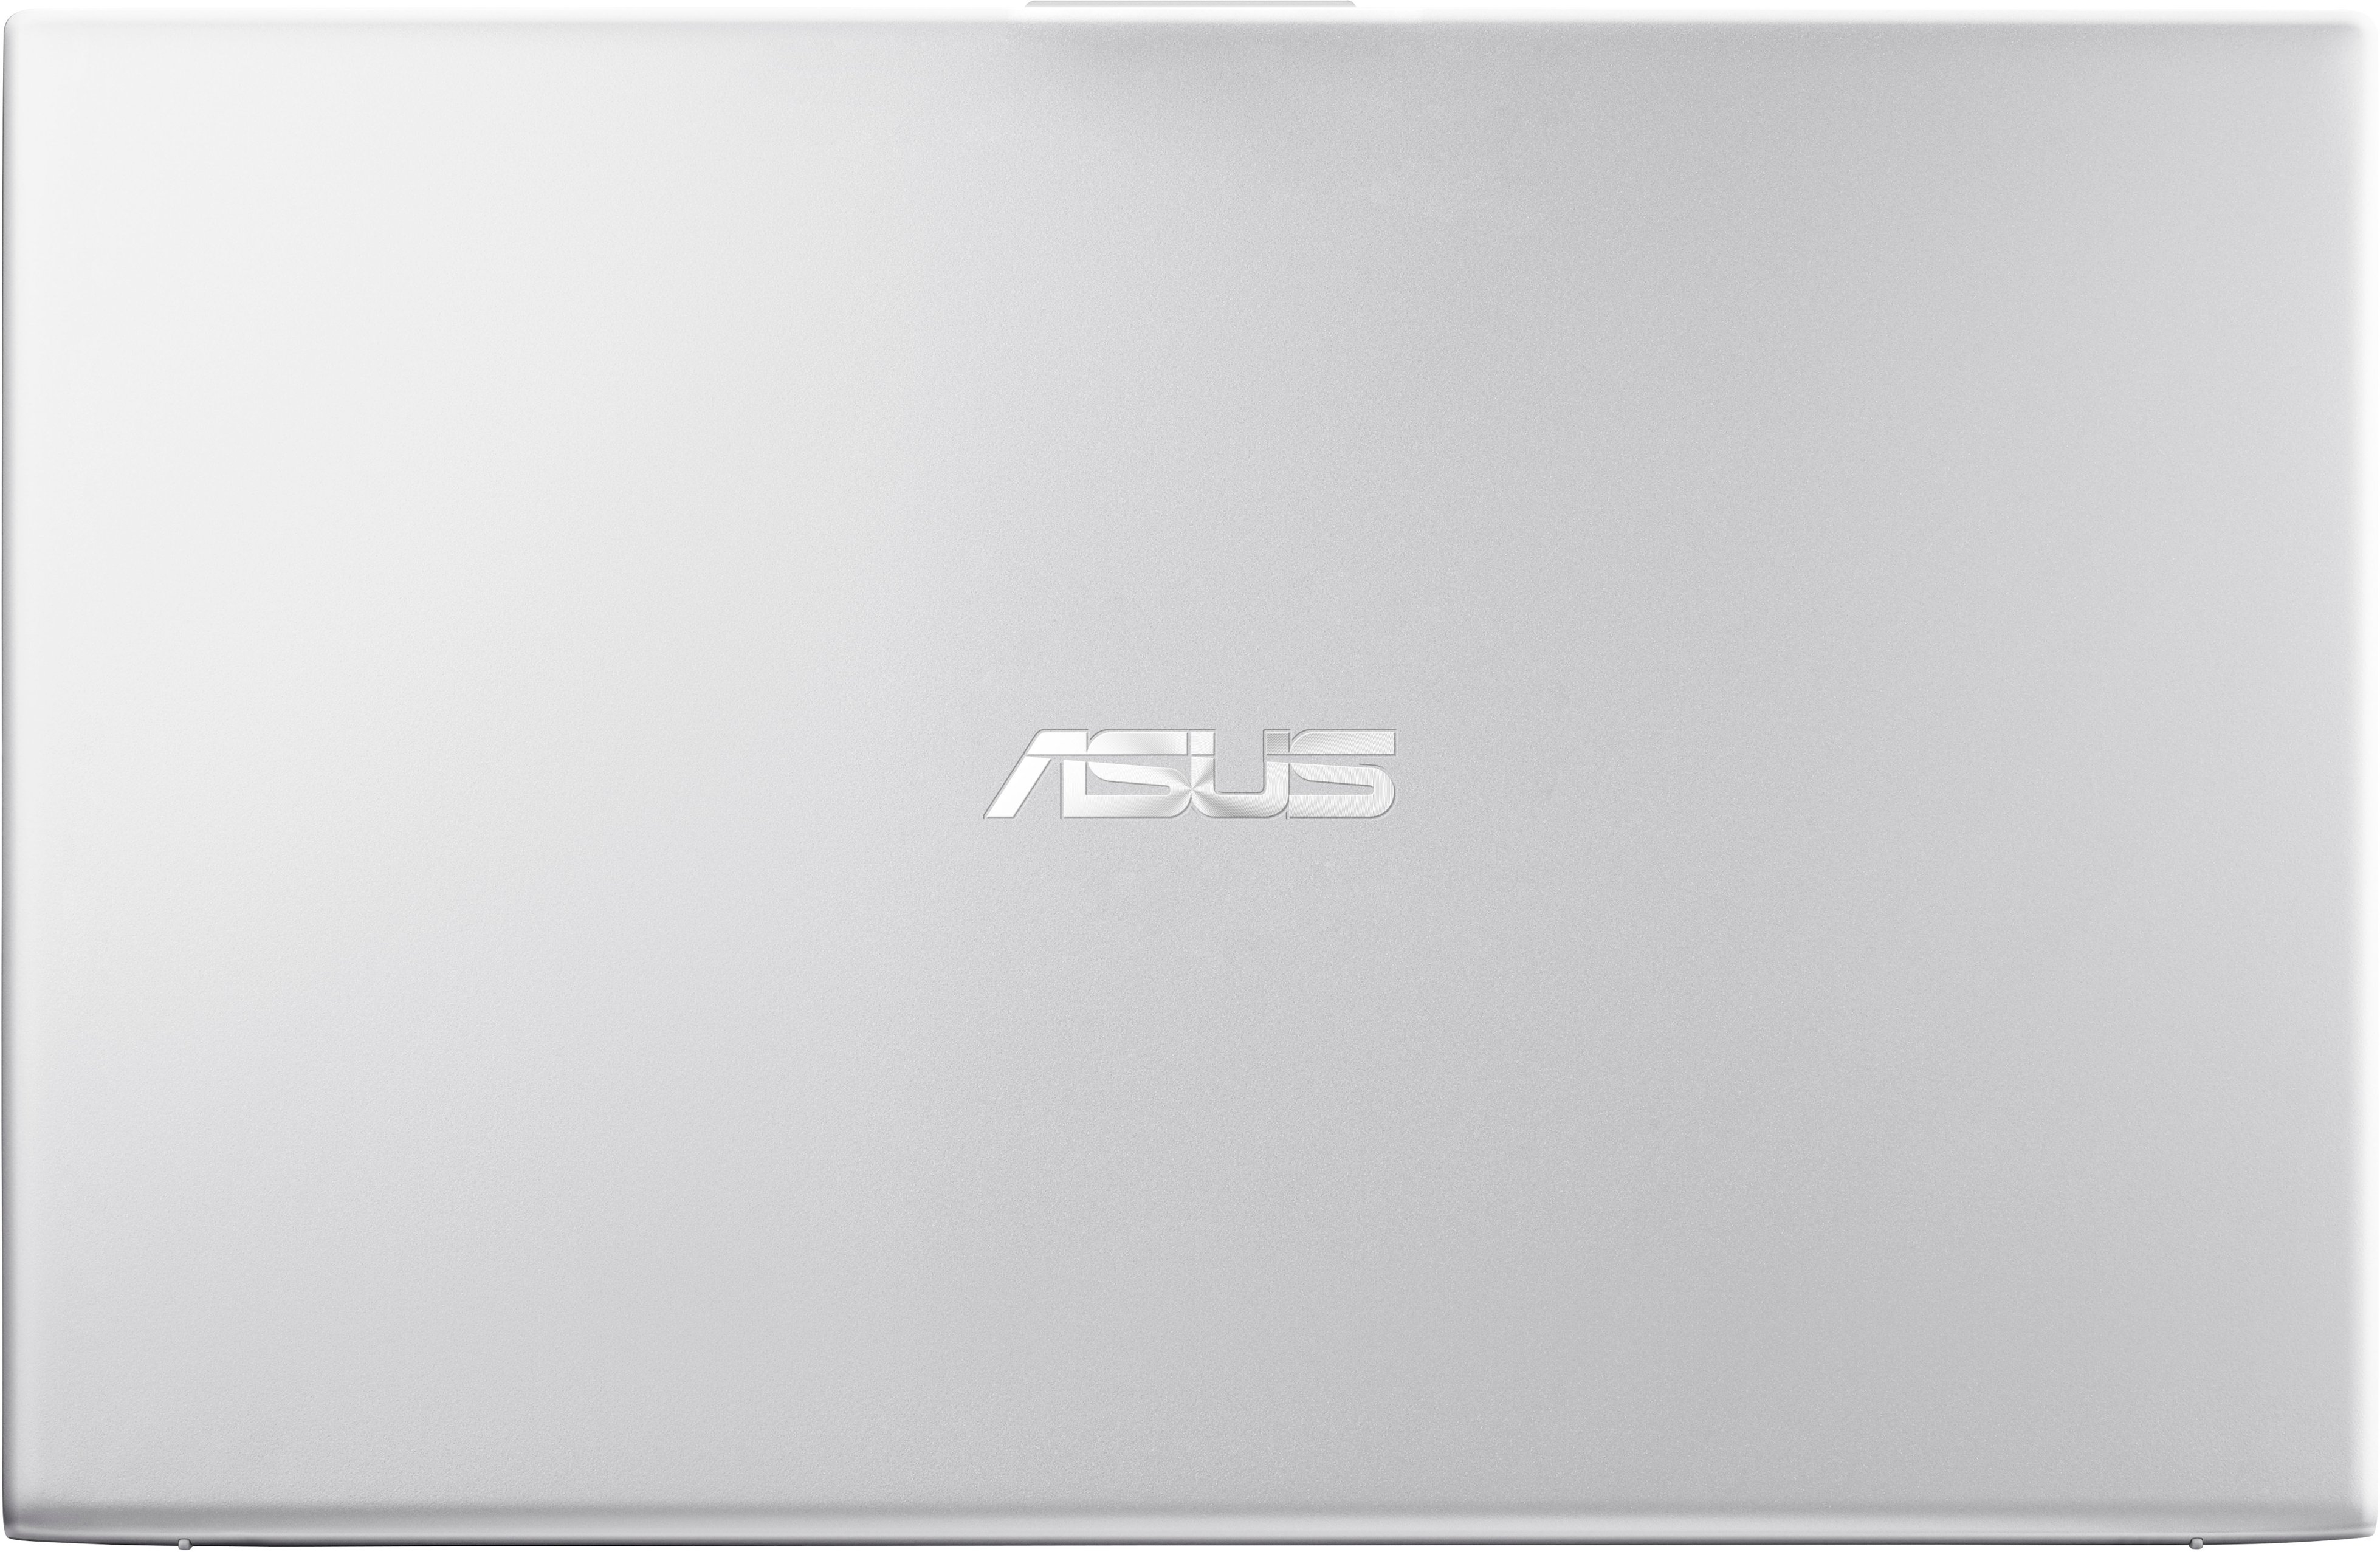 ASUS 2022 Newest Vivobook 17 Laptop, 17.3 Full HD 1080P Non-Touch Display,  Intel Core i3-1115G4 Processor, 12GB DDR4 RAM, 128GB PCIe SSD, Backlit